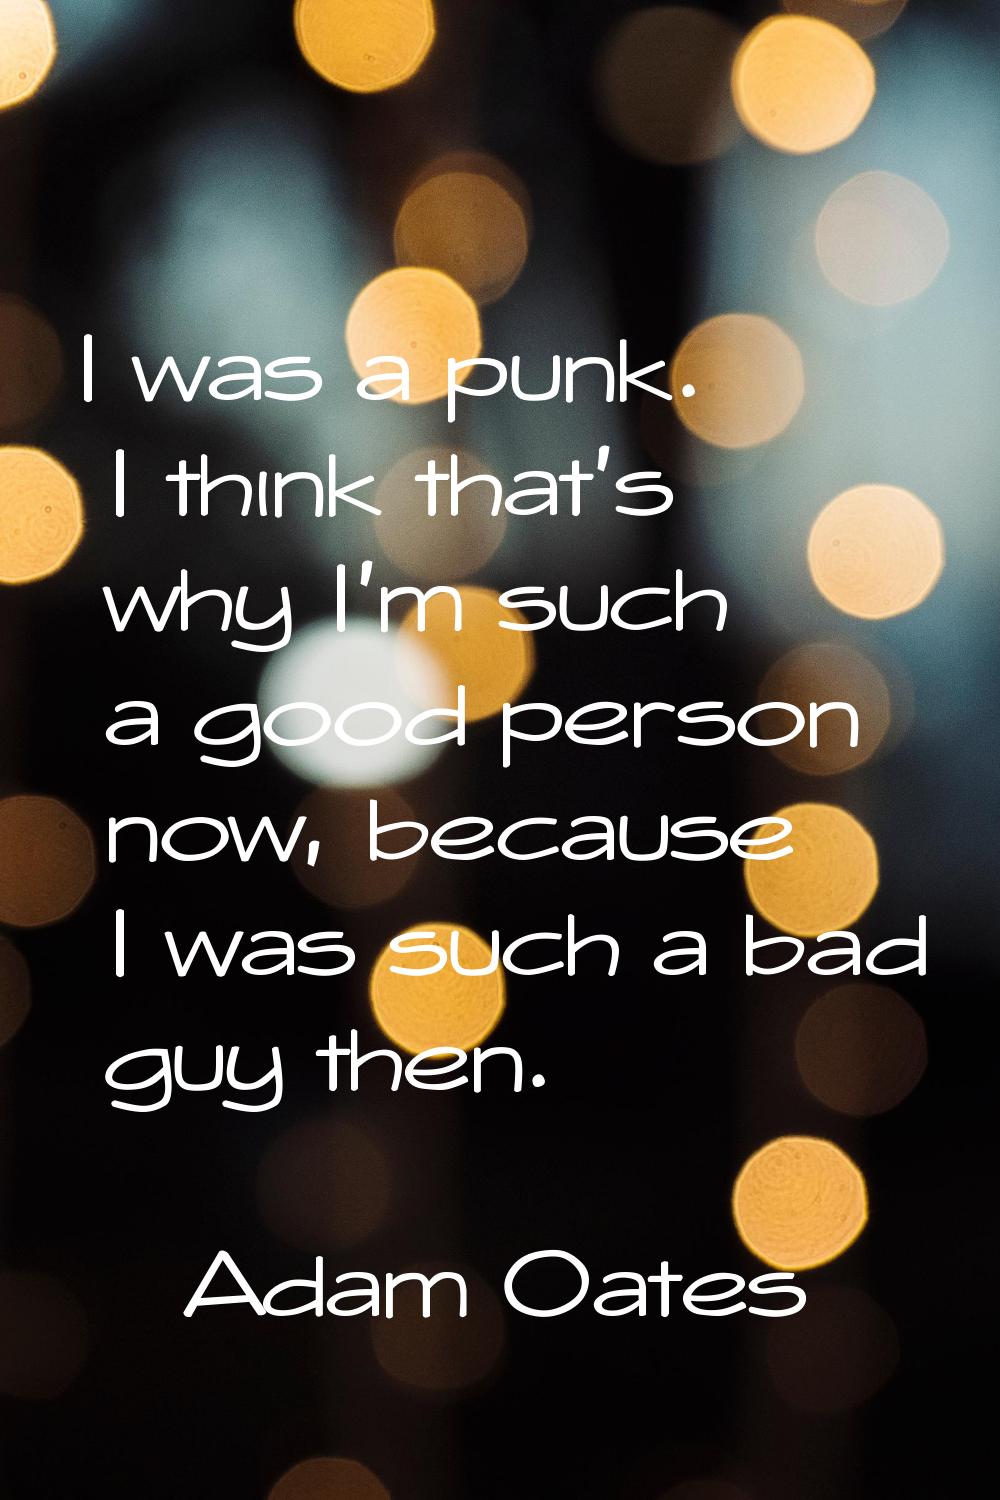 I was a punk. I think that's why I'm such a good person now, because I was such a bad guy then.